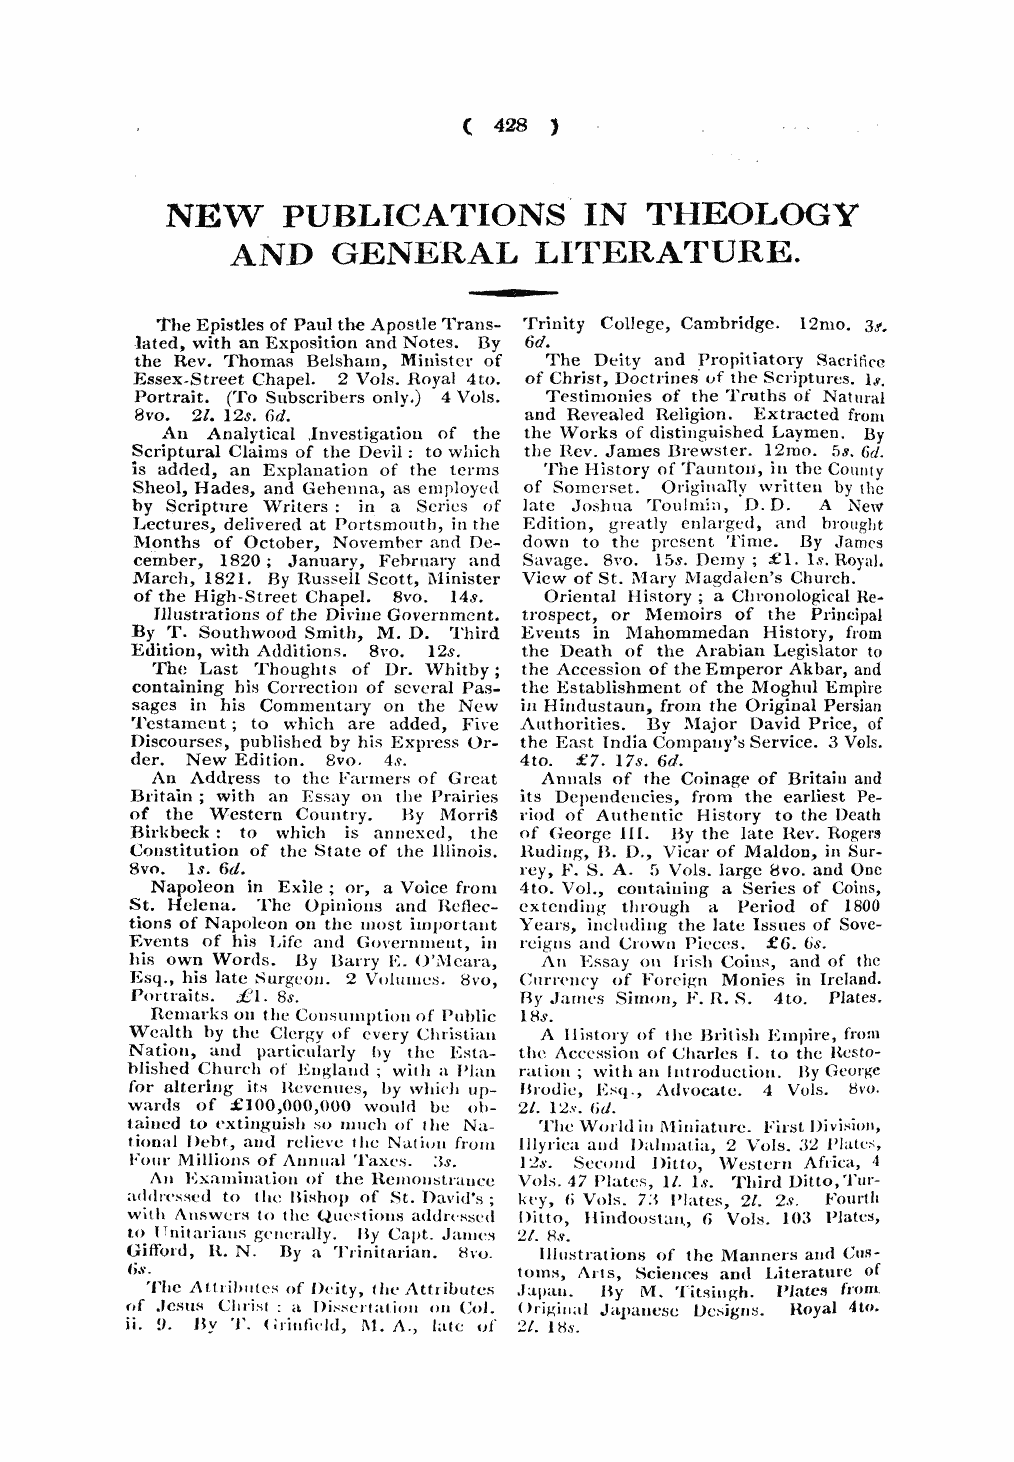 Monthly Repository (1806-1838) and Unitarian Chronicle (1832-1833): F Y, 1st edition: 36